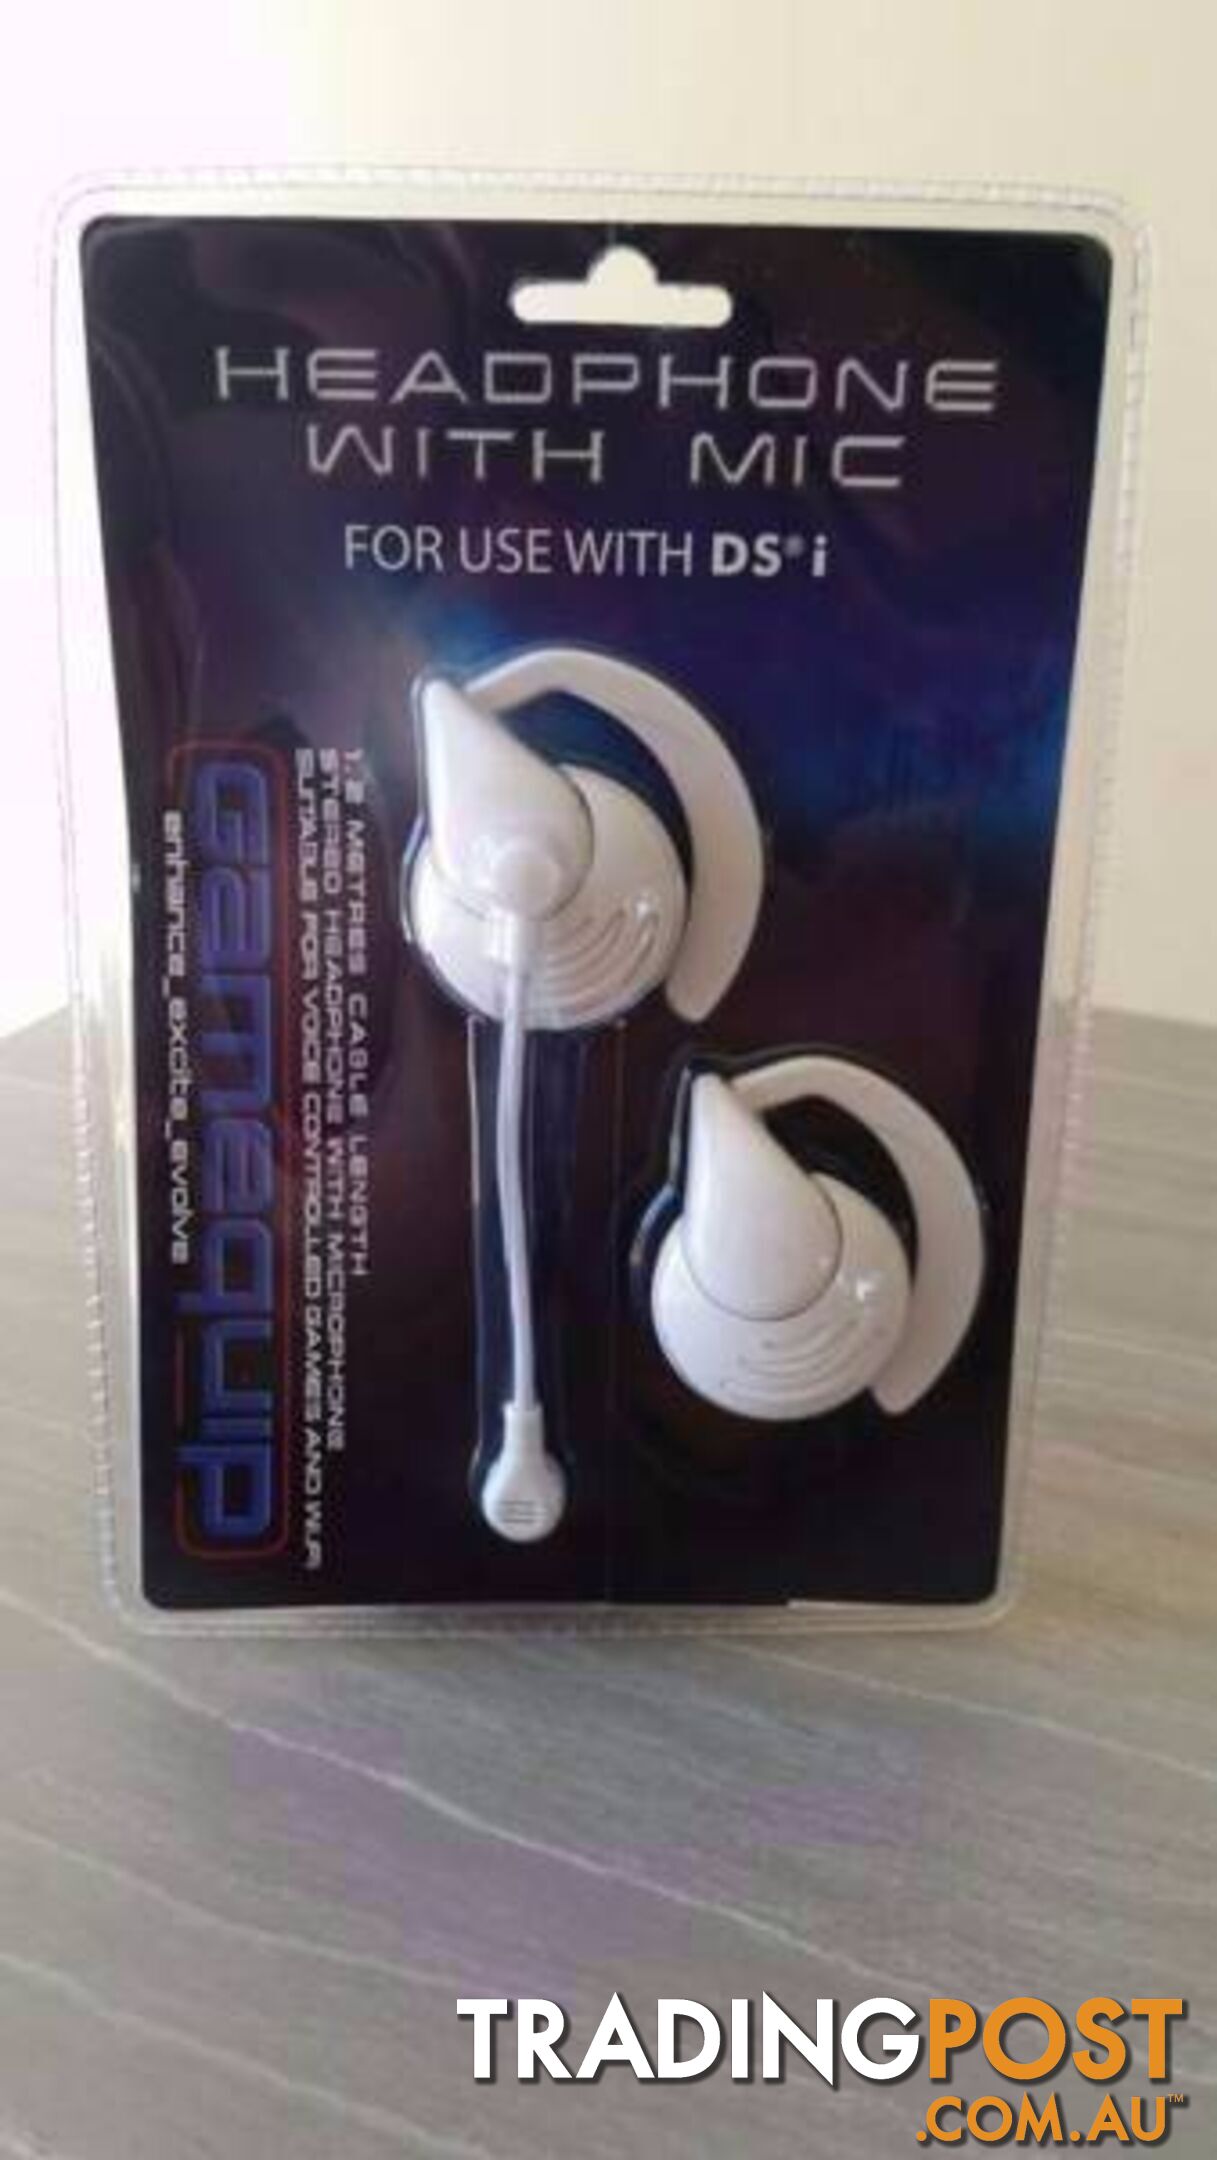 Headphone with MIC for use with DSI